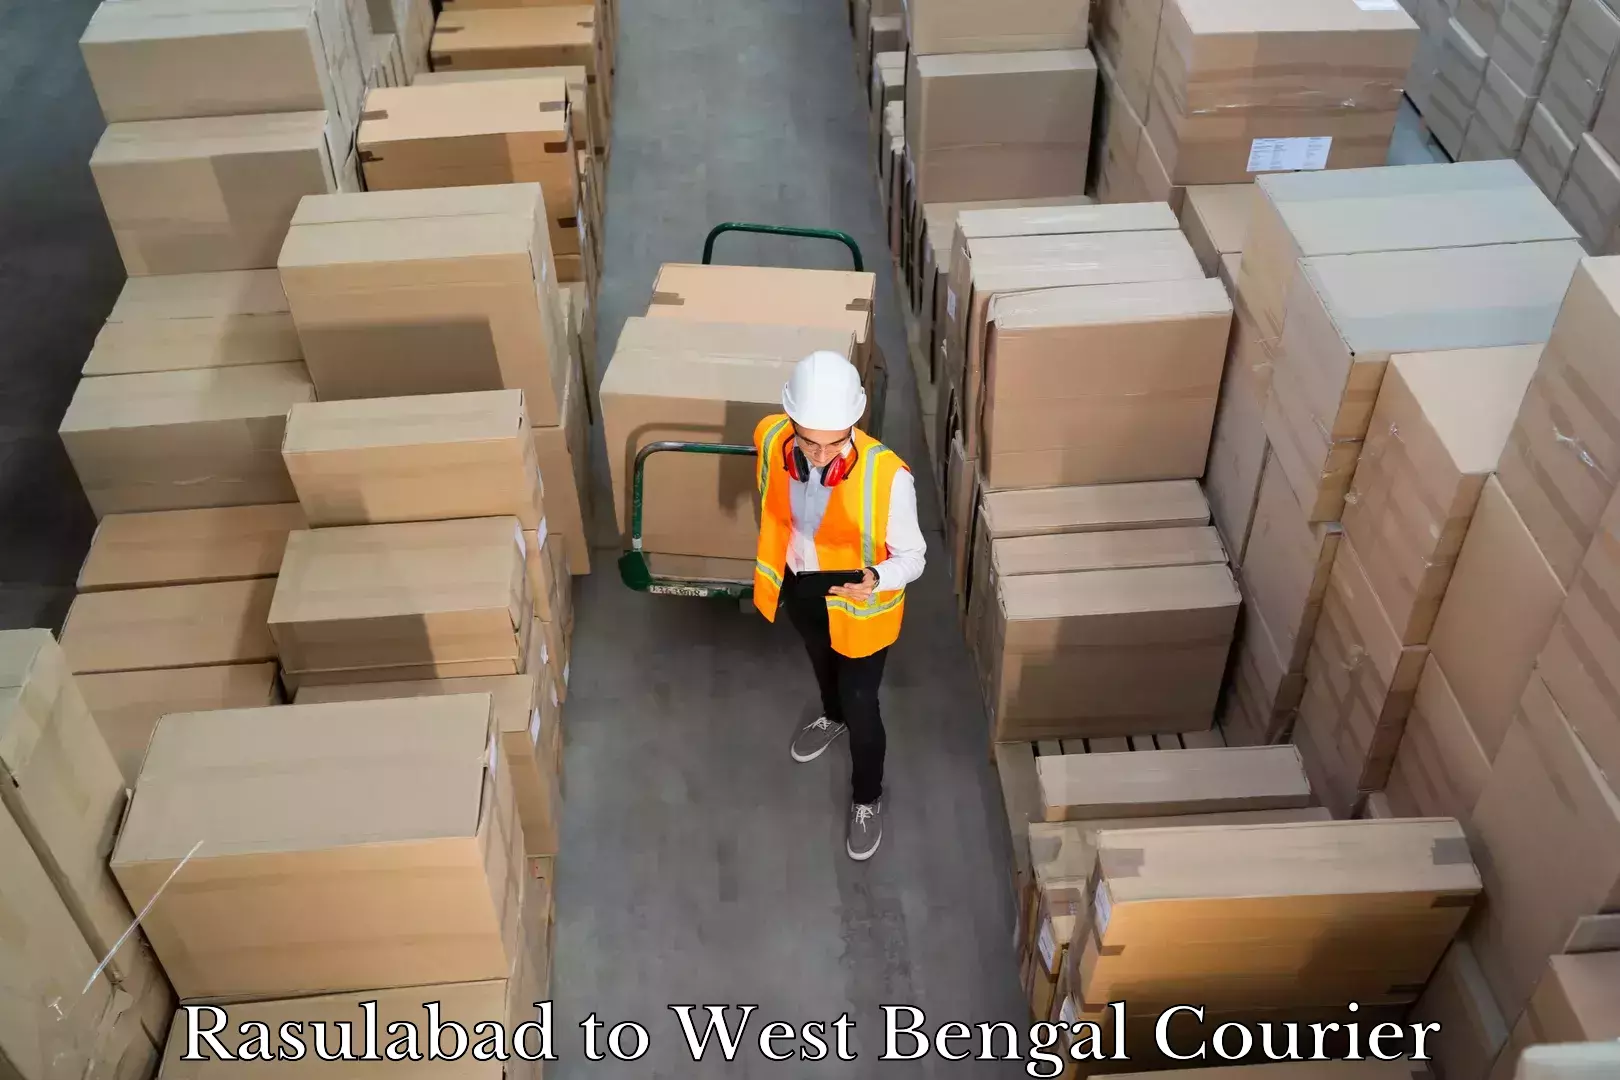 Luggage transport service Rasulabad to West Bengal